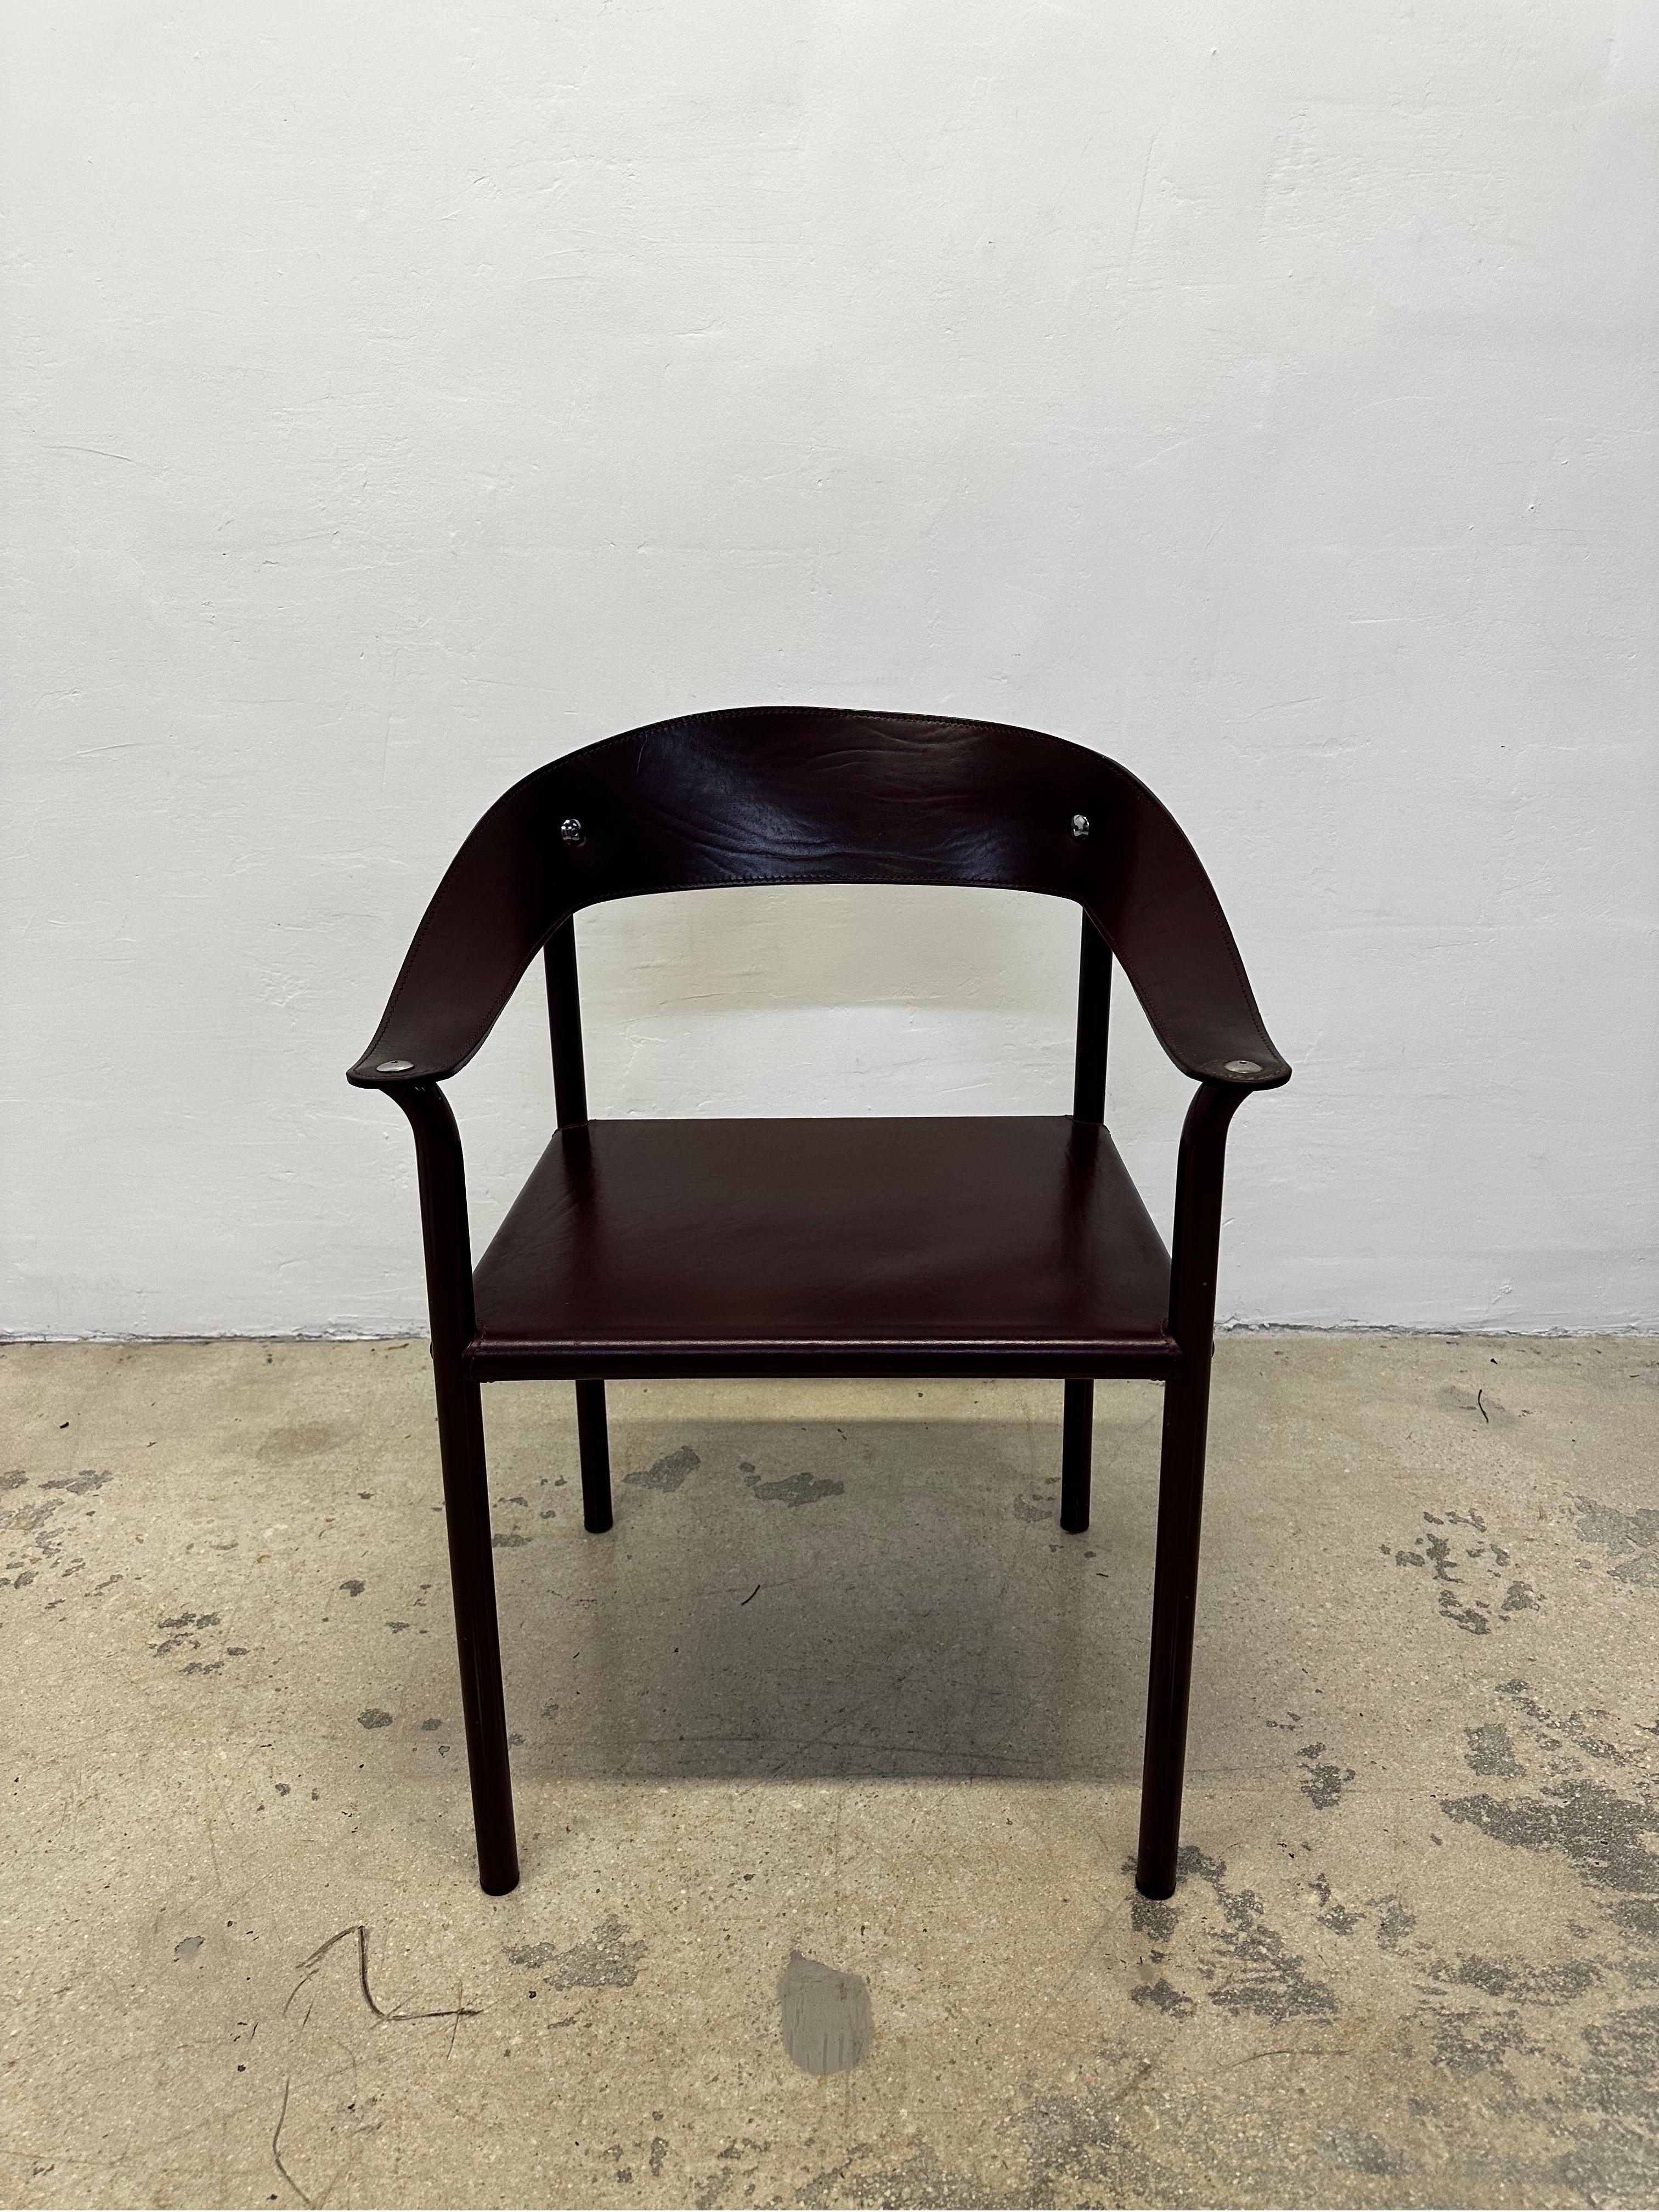 Postmodern leather dining or side chair with steel legs by Artelano, 1980s.  The leather and steel frame are both in a deep maroon color and the leather back and arm rests have chrome hardware.